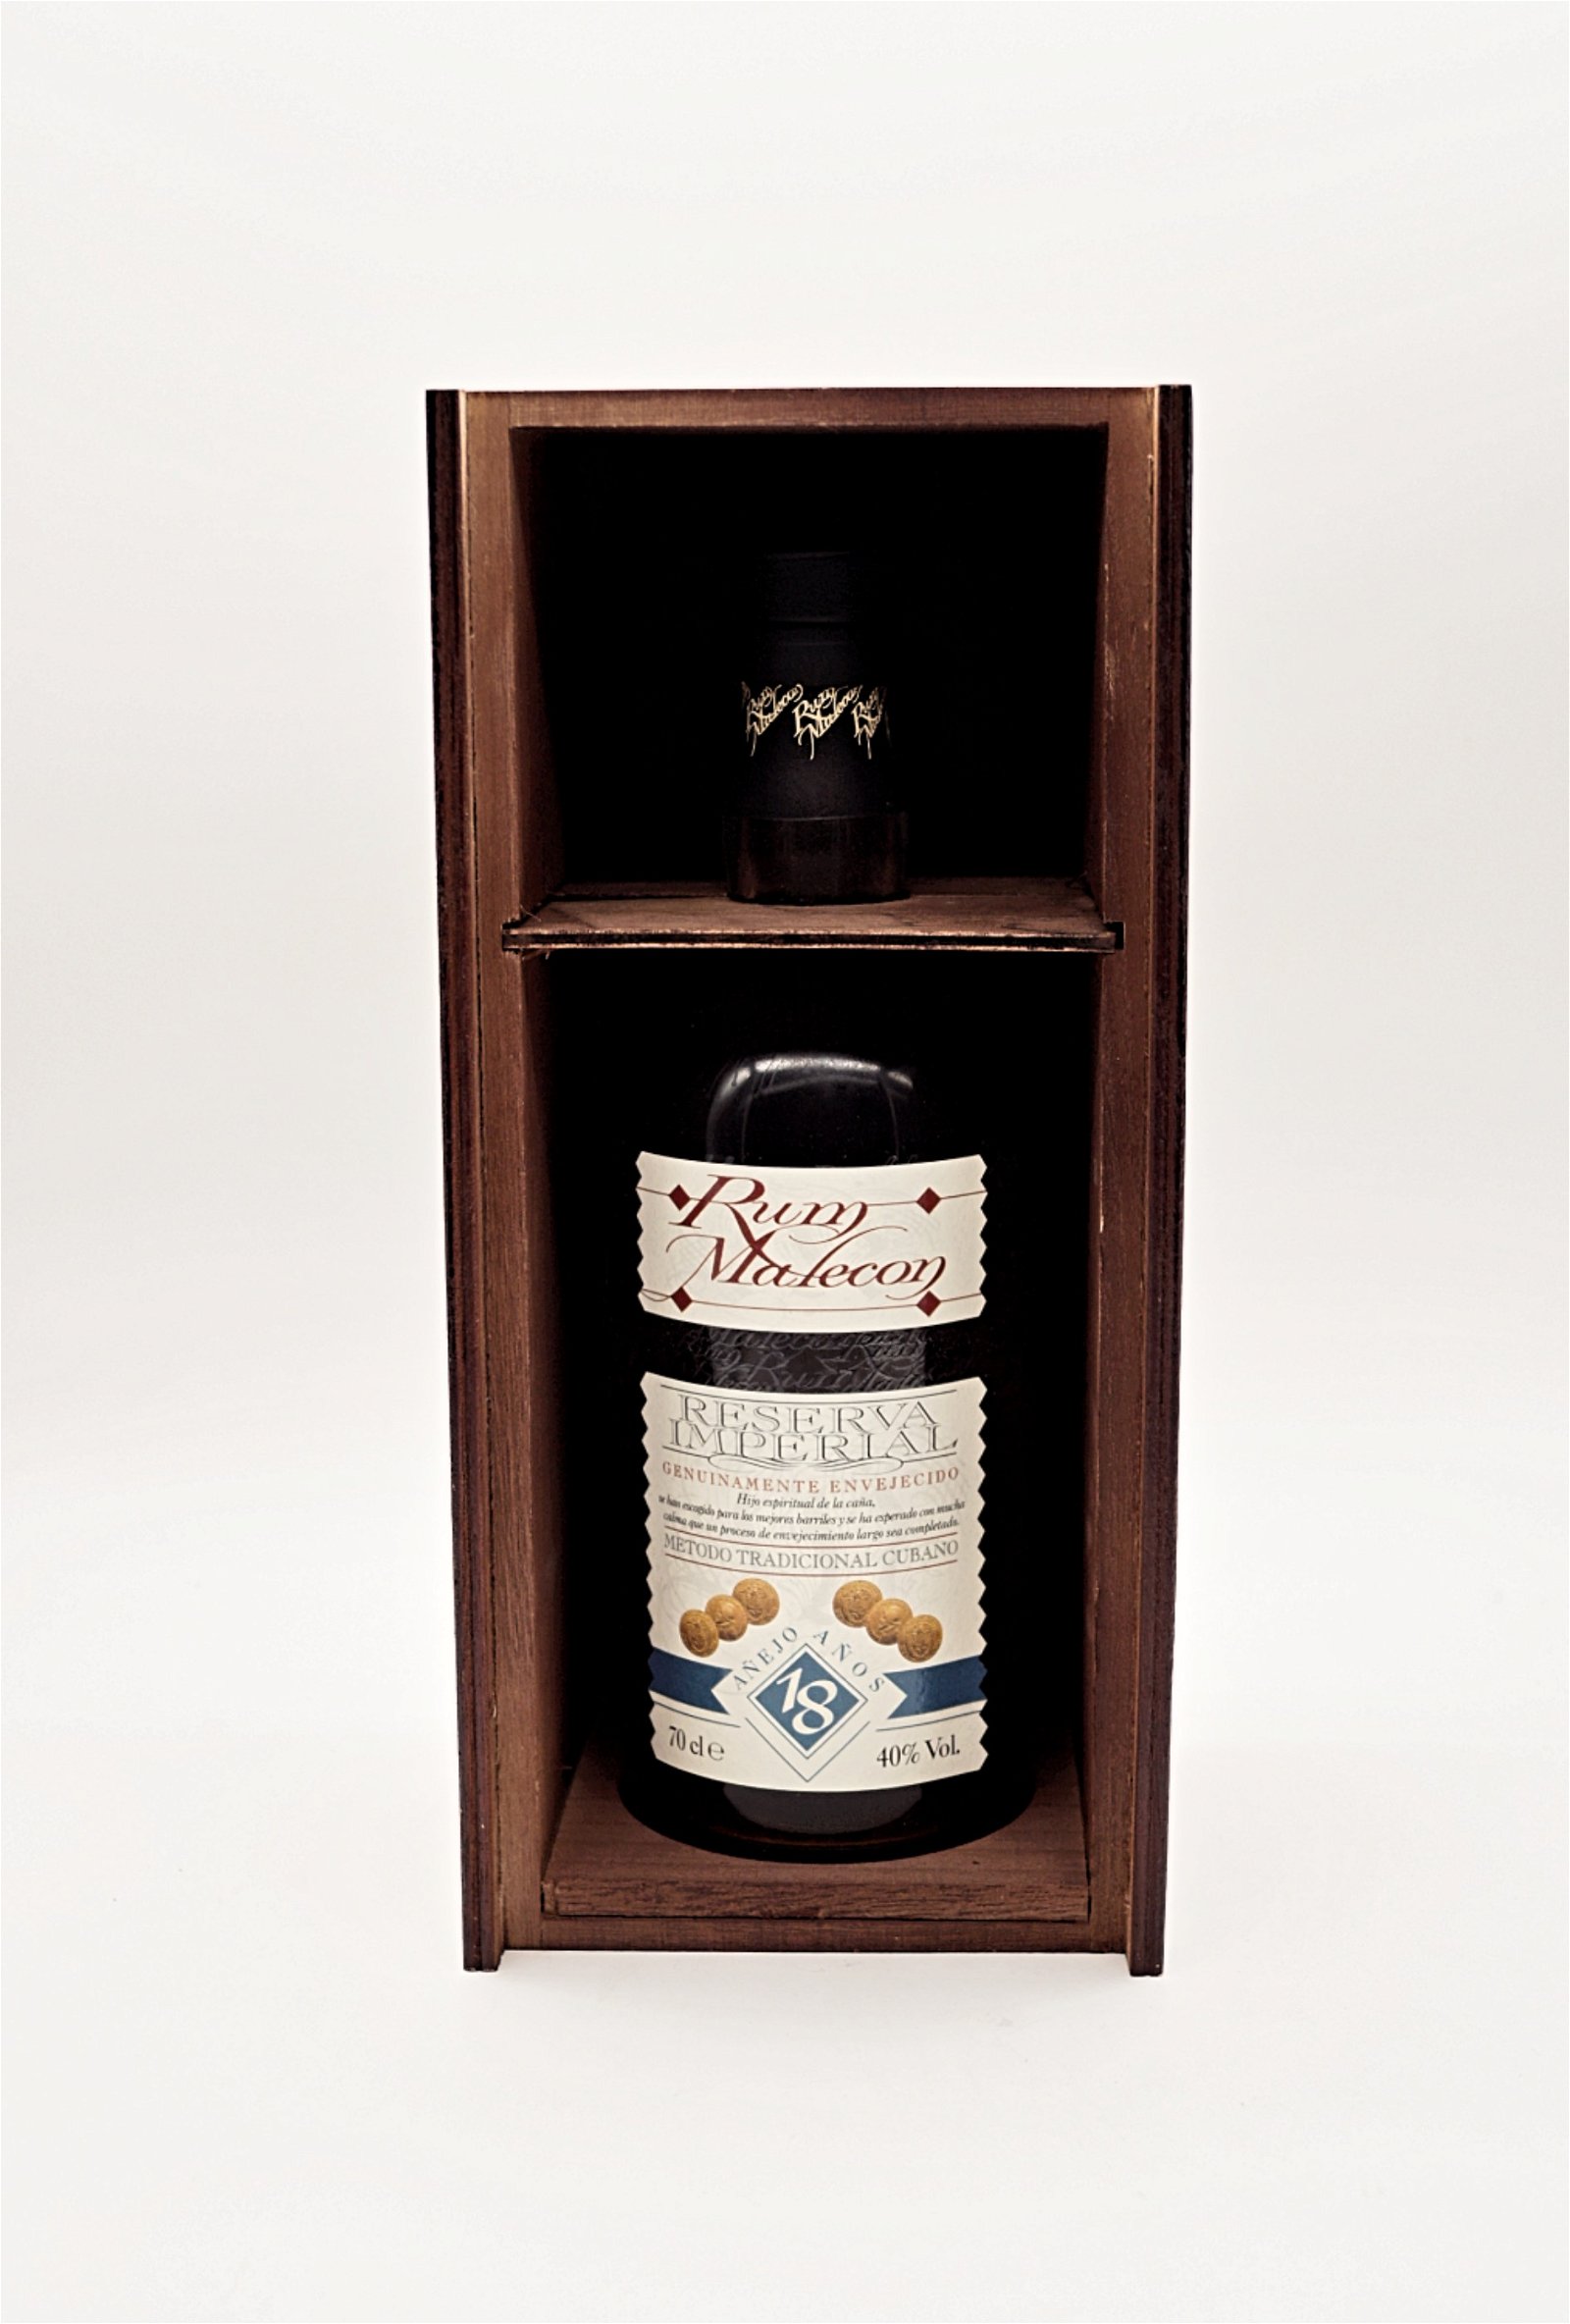 Rum Malecon Reserva Imperial 18 Anos Holzbox